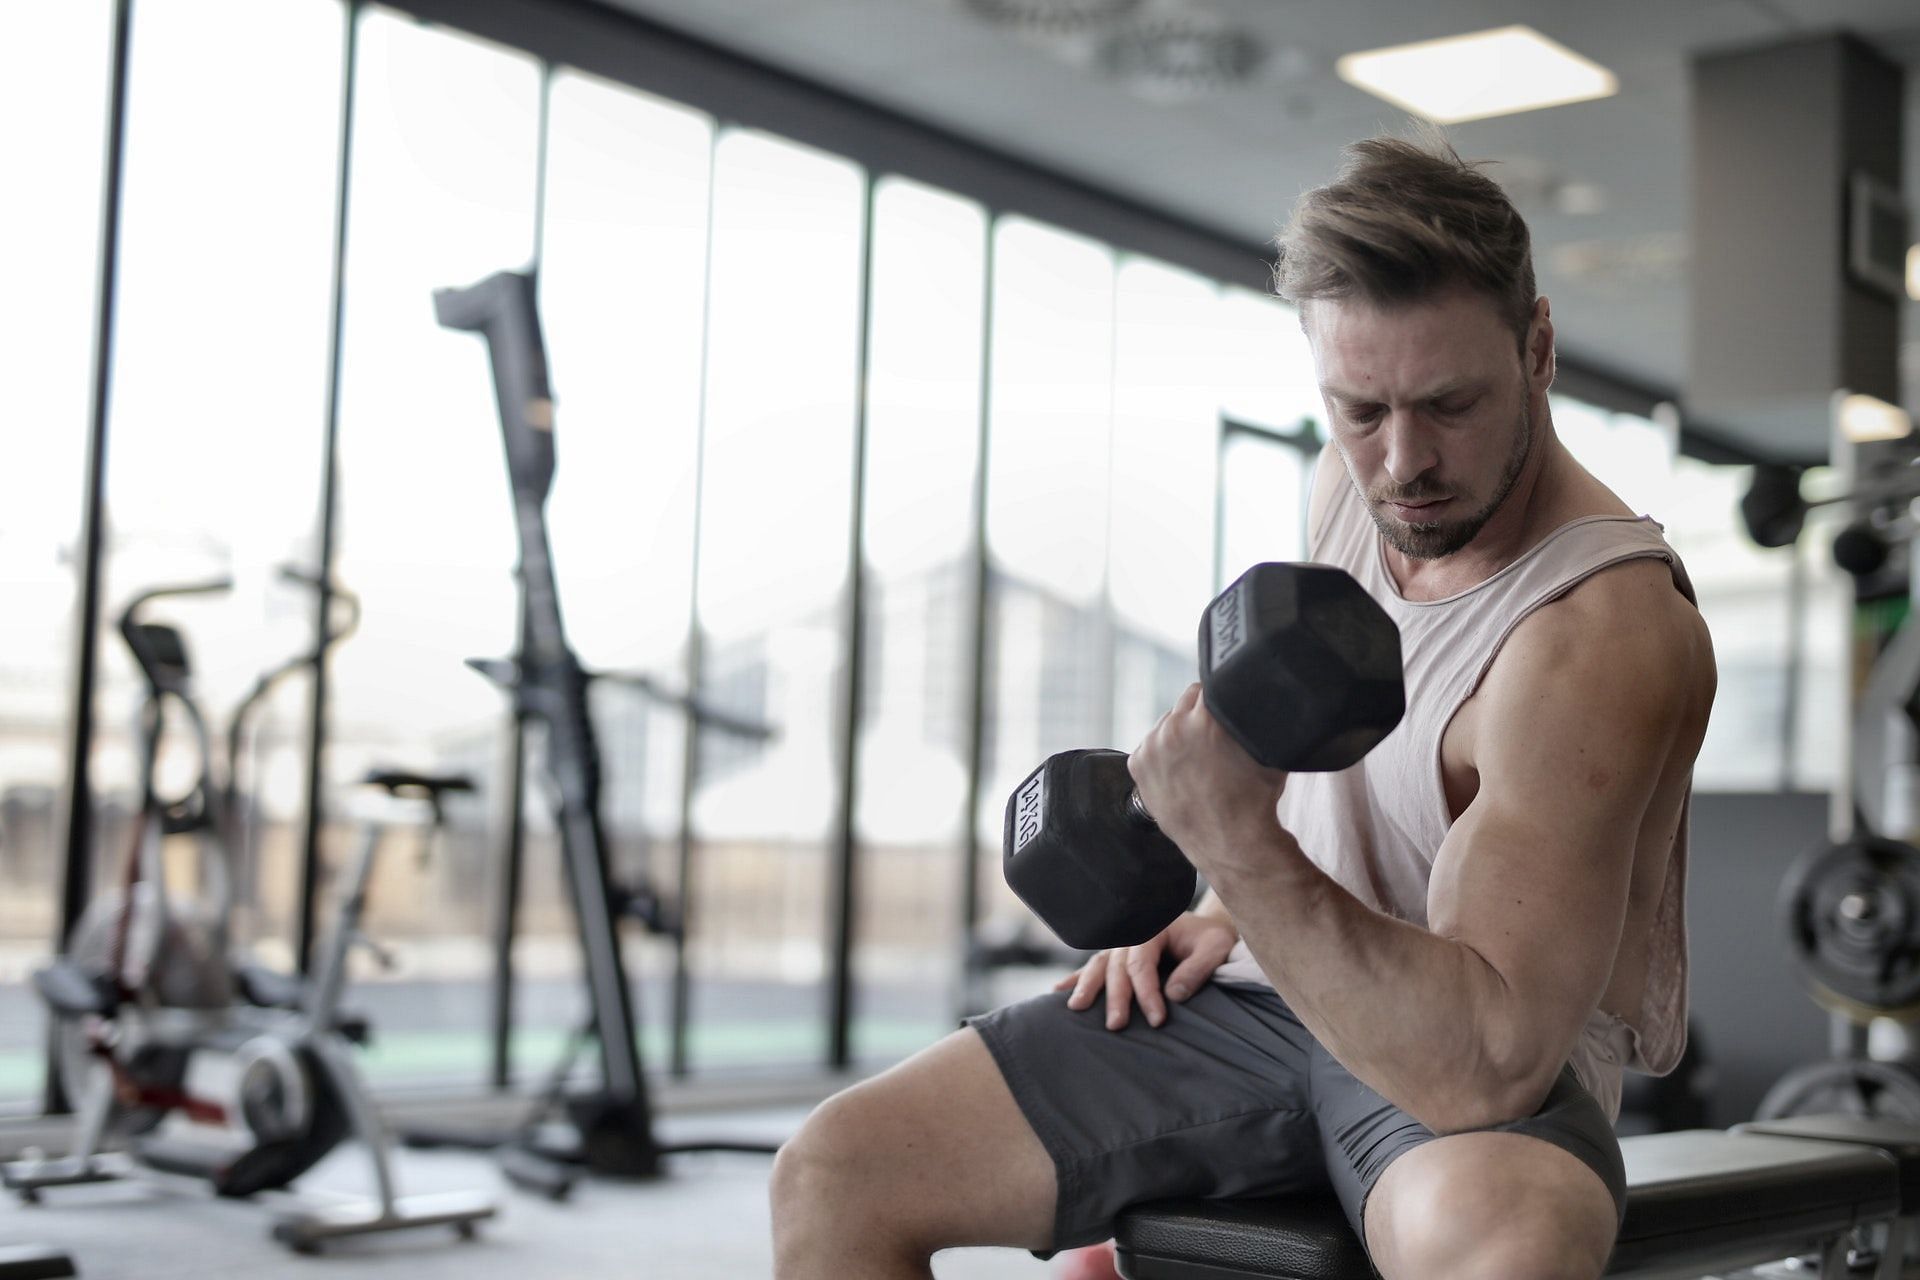 There are several dumbbell exercises you can do for stronger arms. (Photo by Andrea Piacquadio via pexels)